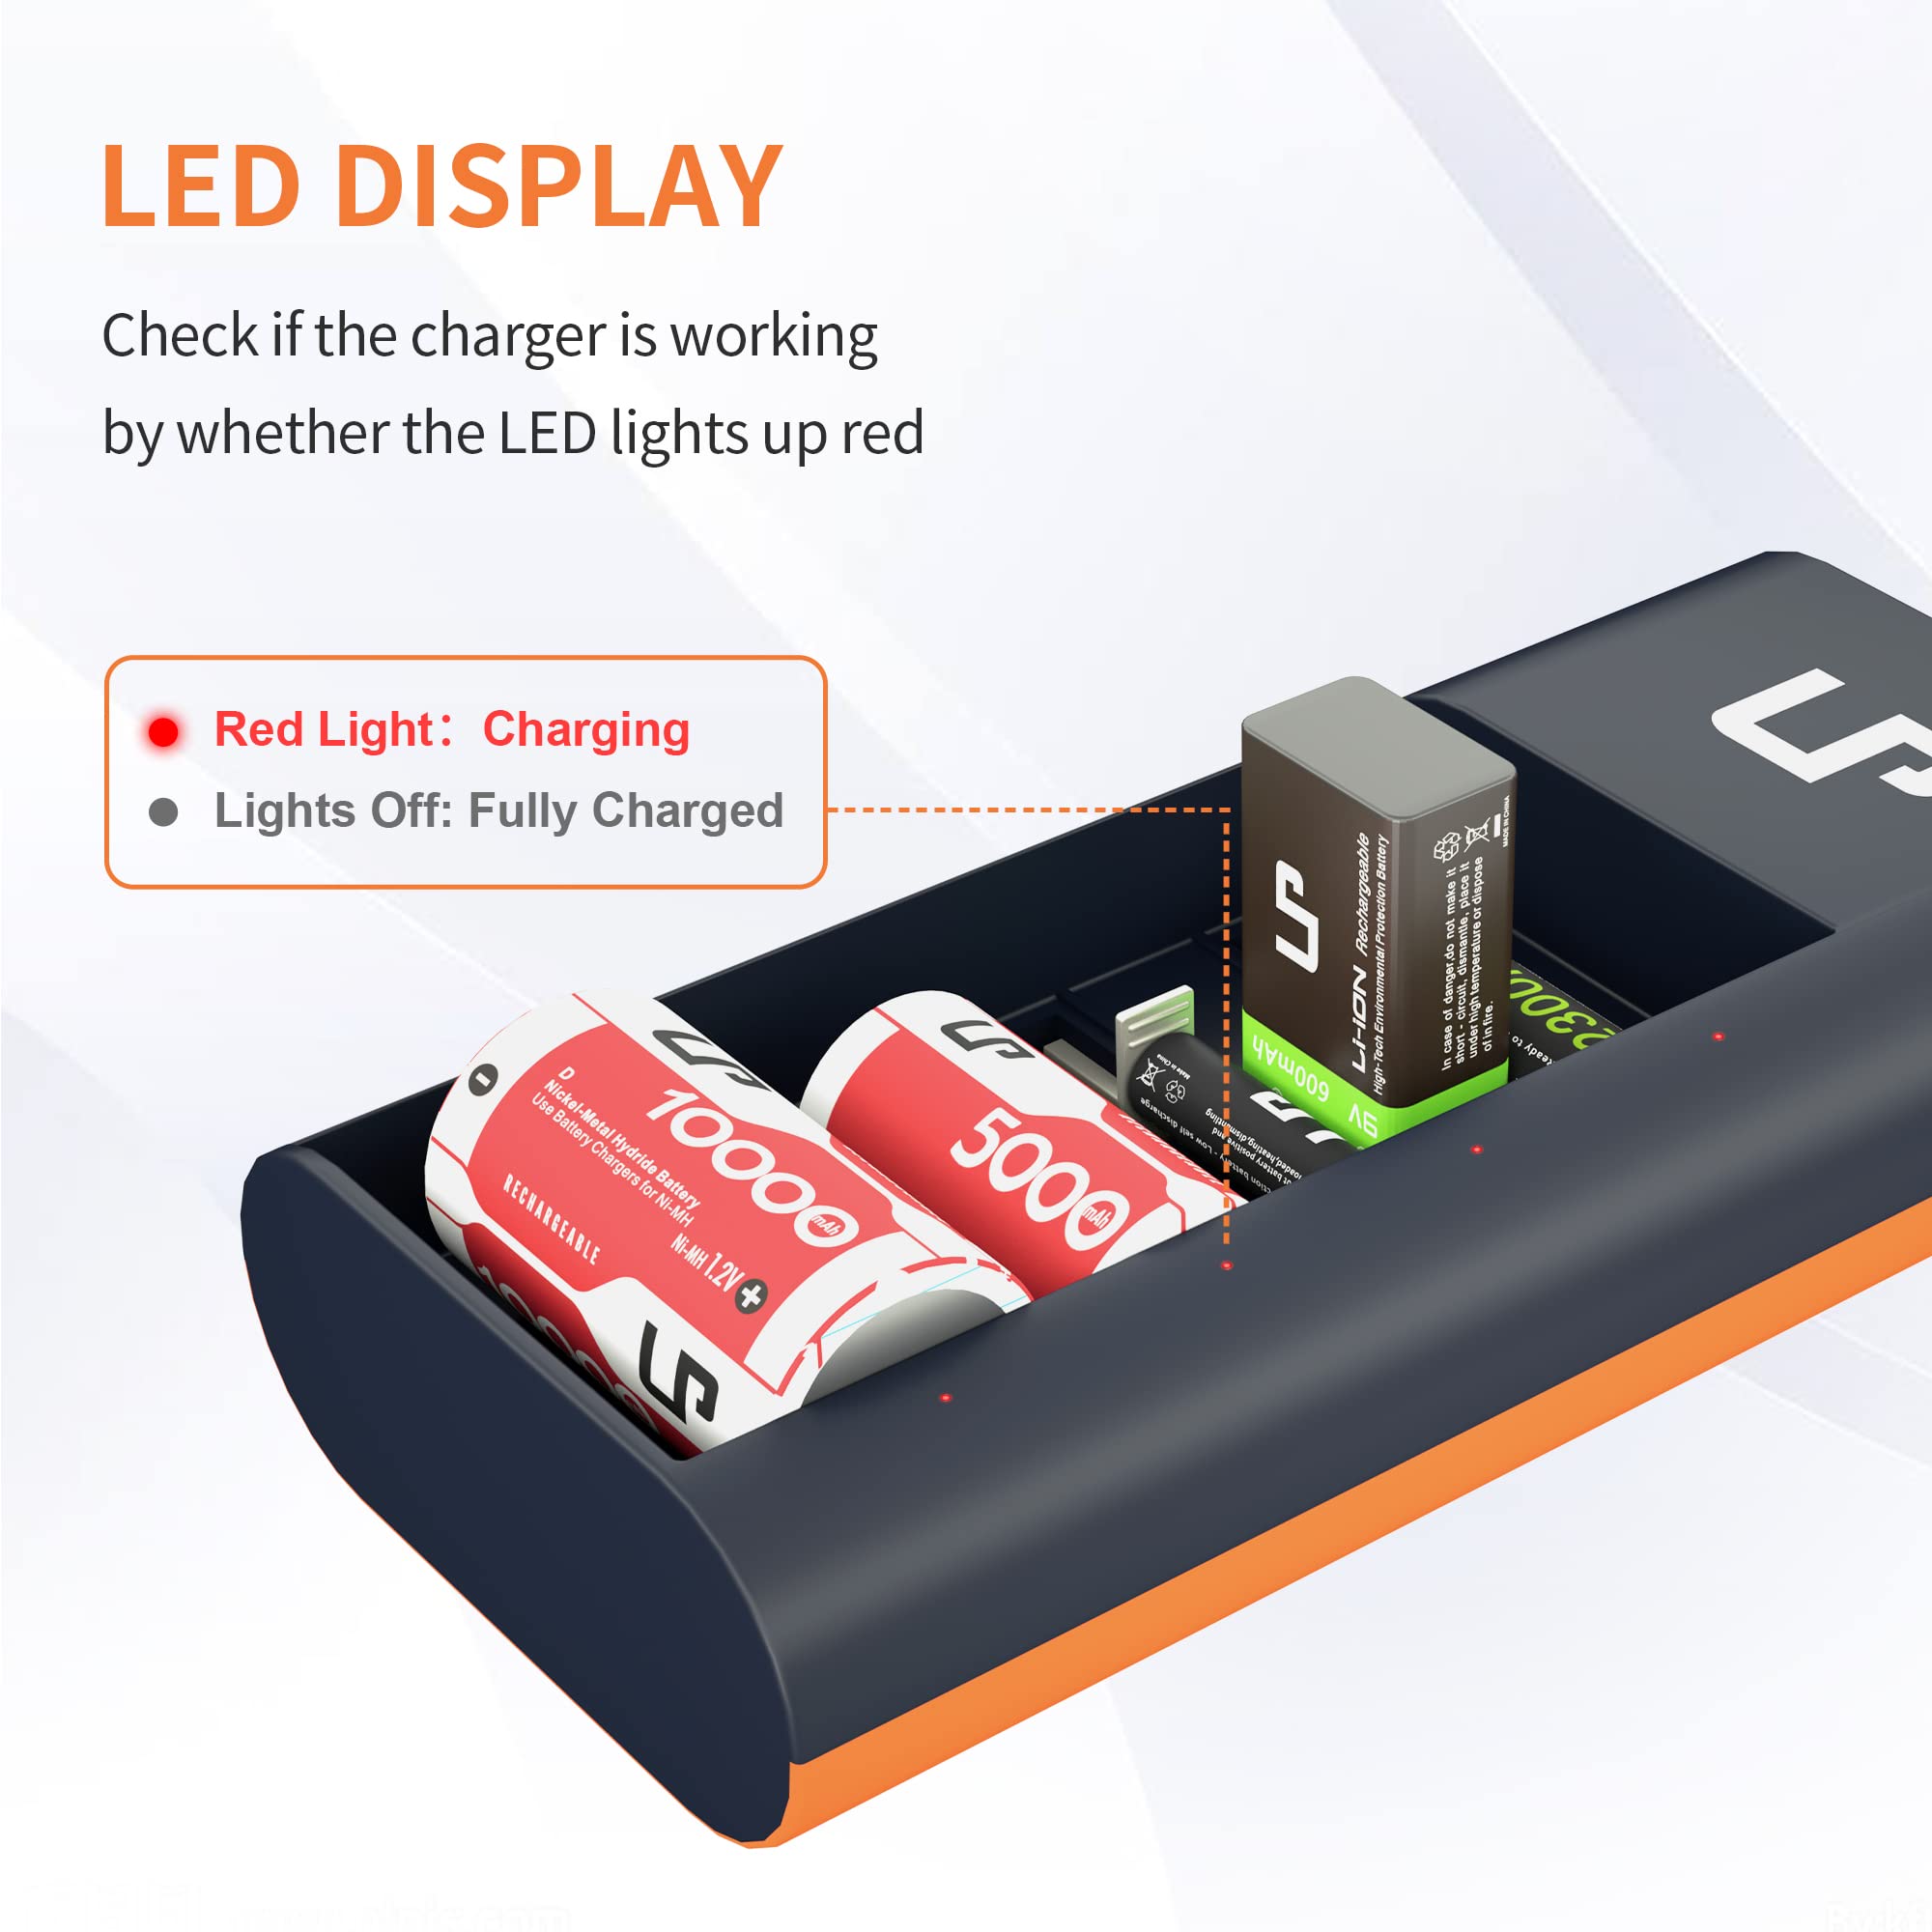 LP Universal Battery Charger LED Display for Rechargeable Batteries NI-MH NI-CD AA AAA C D 9V Li-ion, Smart Battery Charger with AC Adapter Fast Charging for 1.2V NI-MH NI-CD Batteries